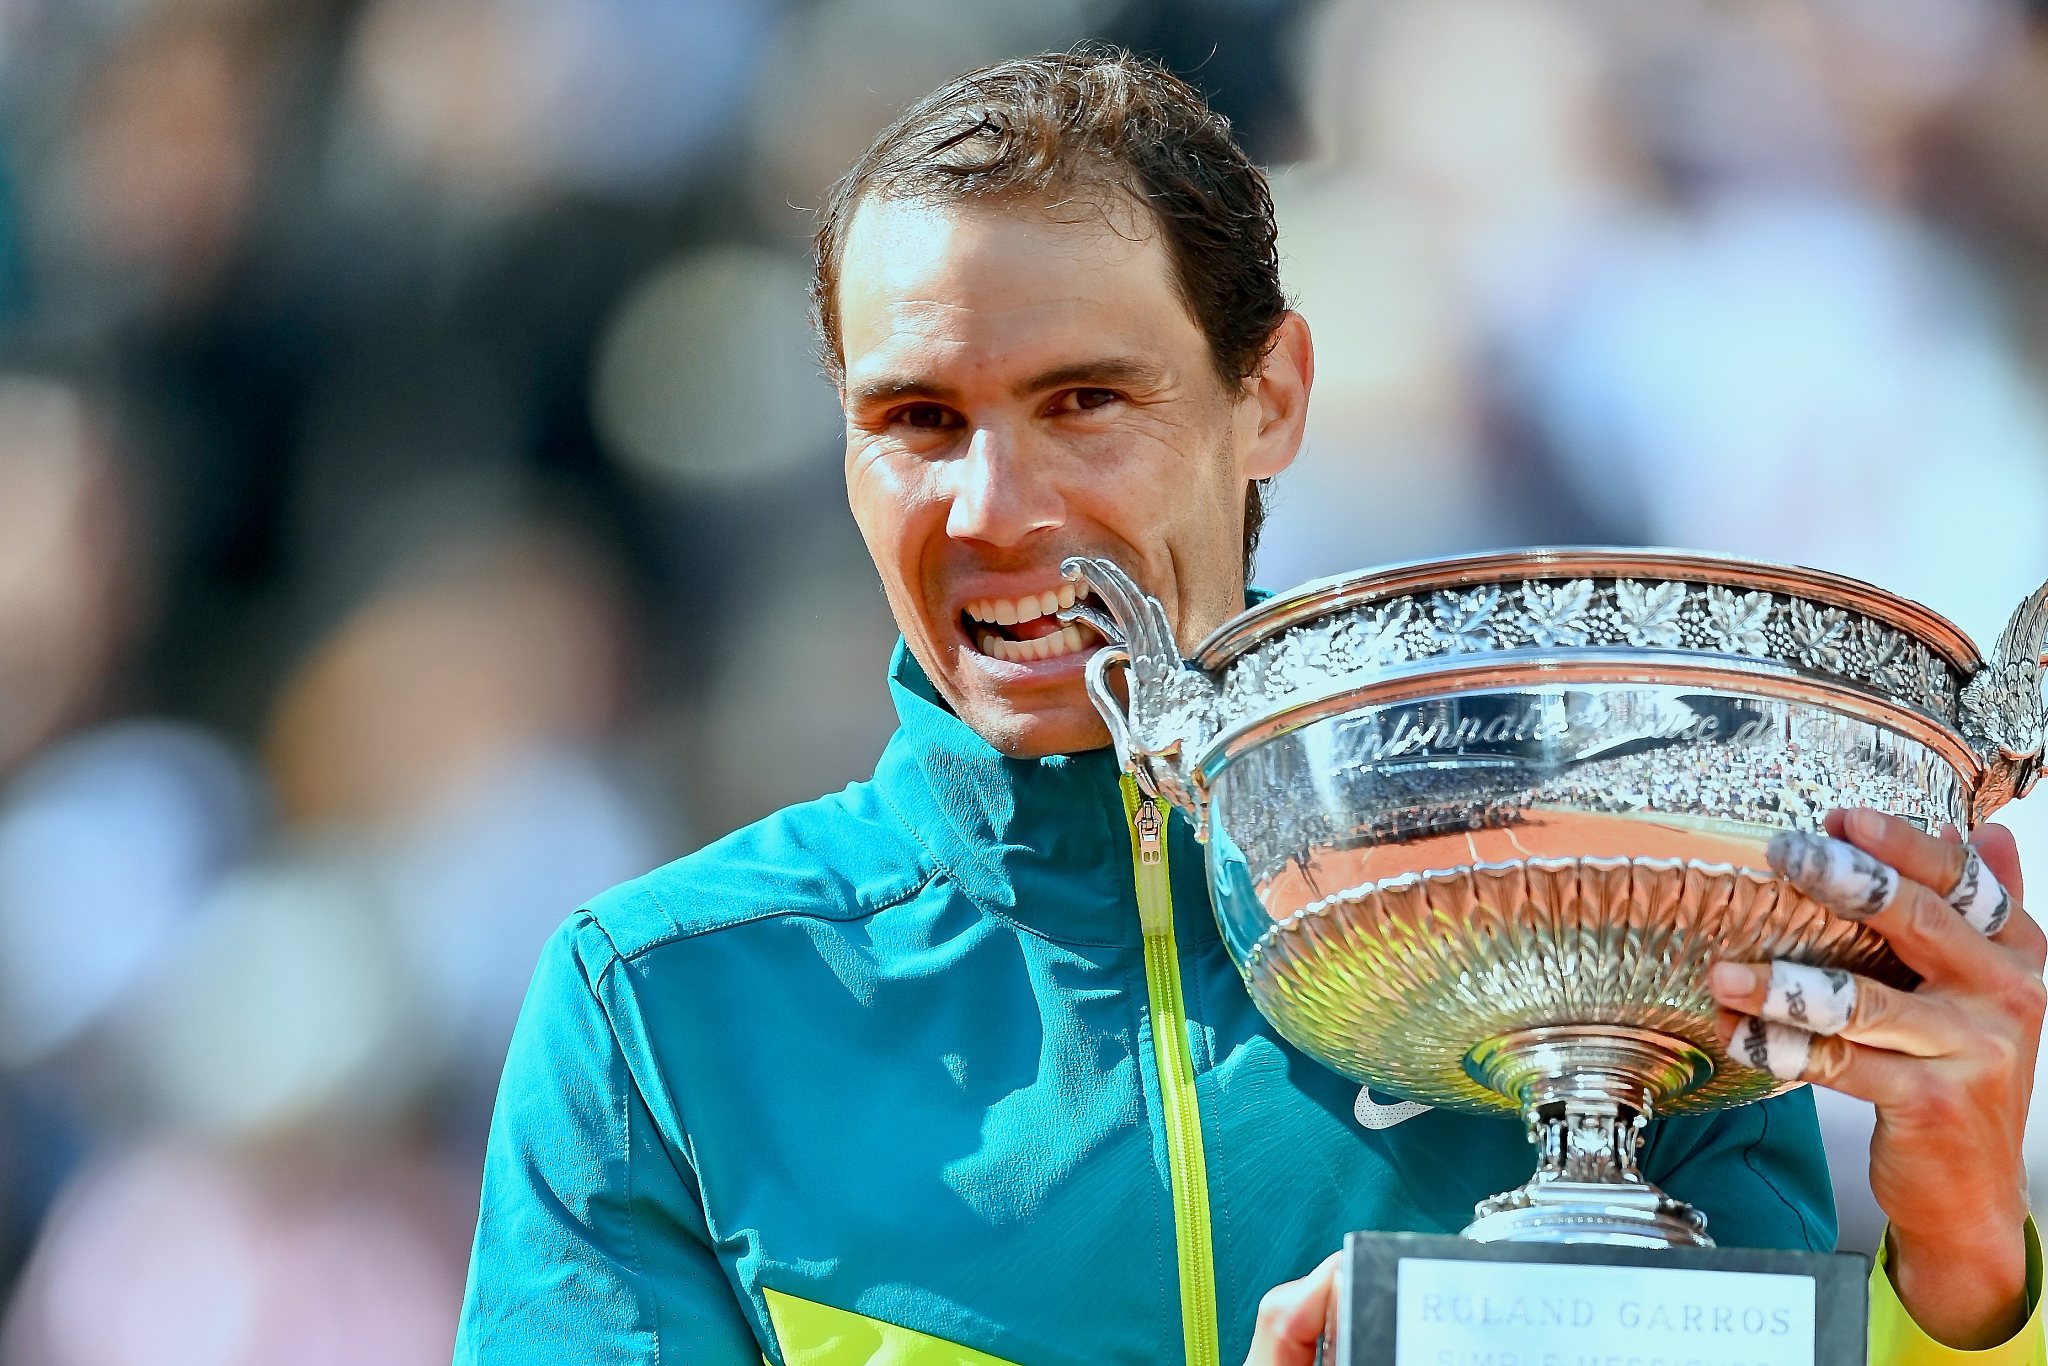 Rafael Nadal of Spain celebrates with the trophy after winning the French Open at Roland Garros in Paris, France, June 5, 2022. /CFP